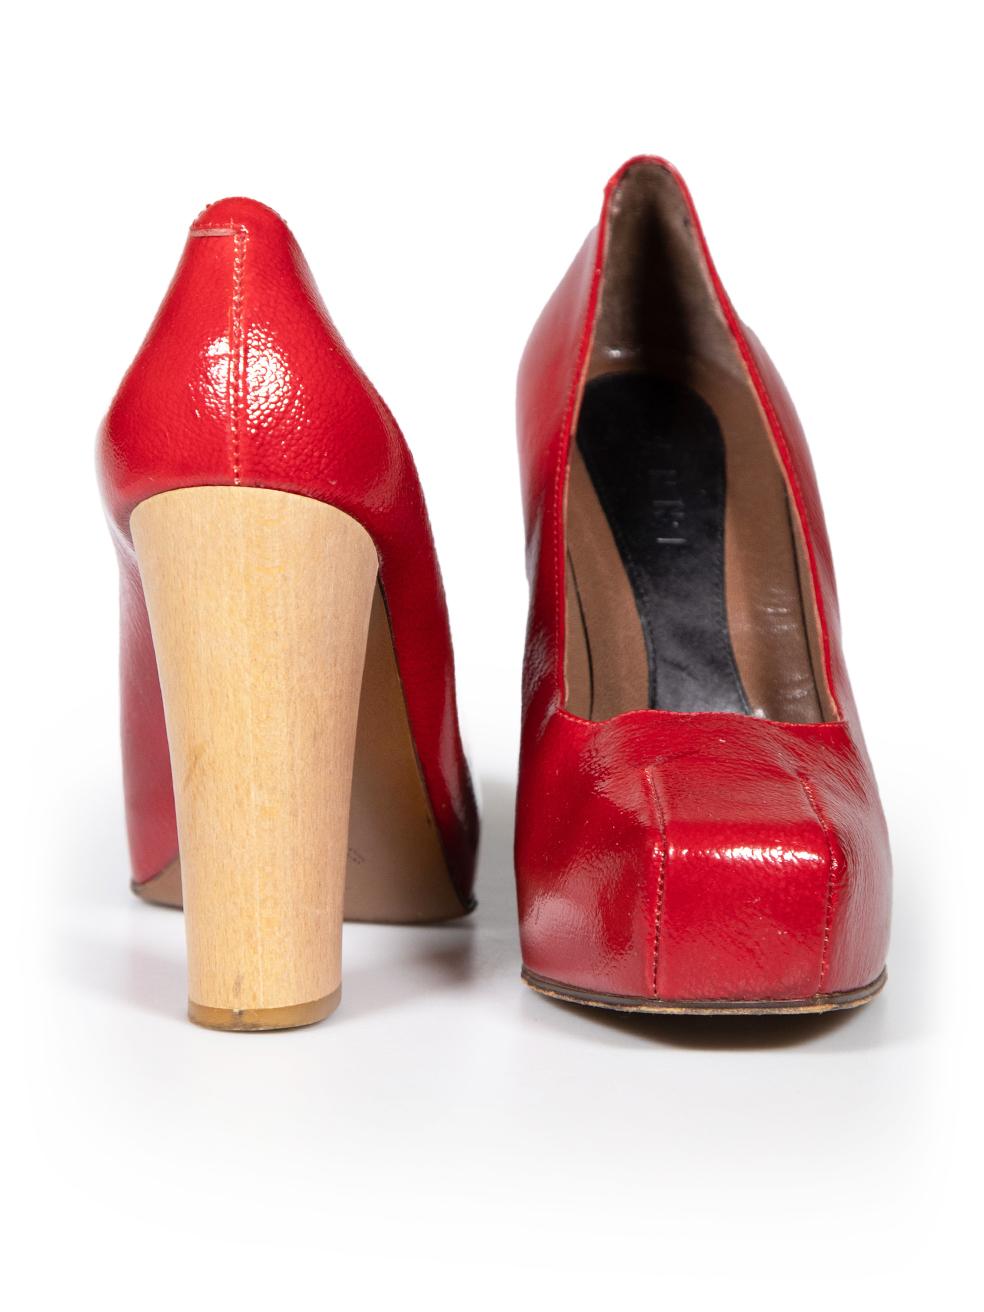 Marni Red Patent Square Toe Platform Heels Size IT 39.5 In Good Condition For Sale In London, GB